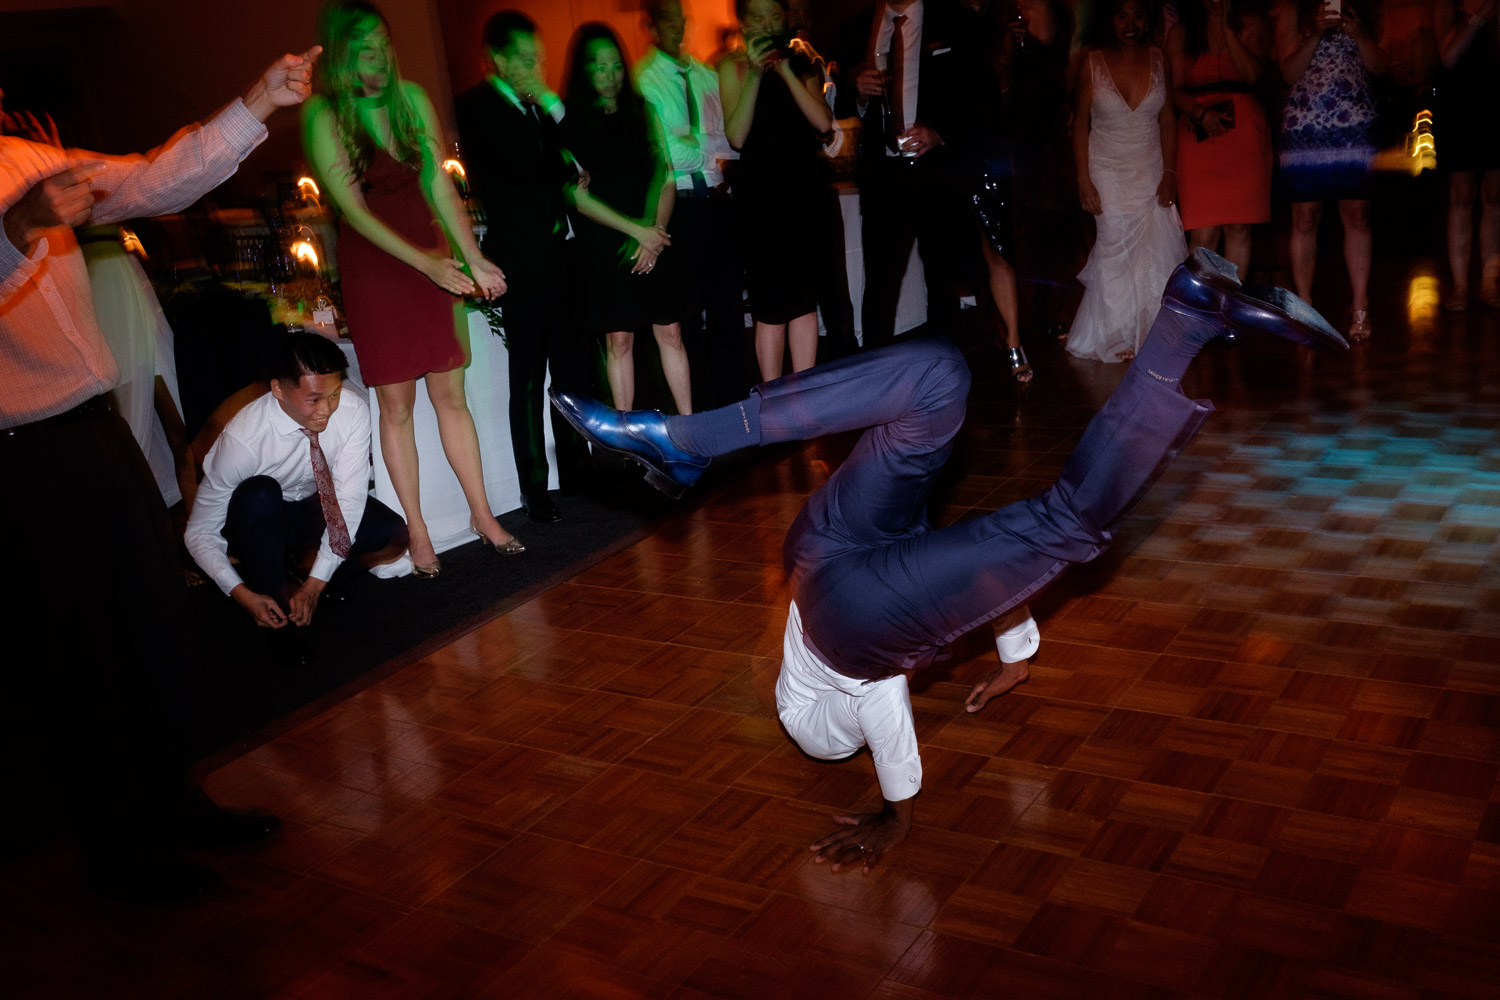  The groom does some breakdancing on the dance floor during his wedding reception at the Art Gallery of Ontario in Toronto.&nbsp; 